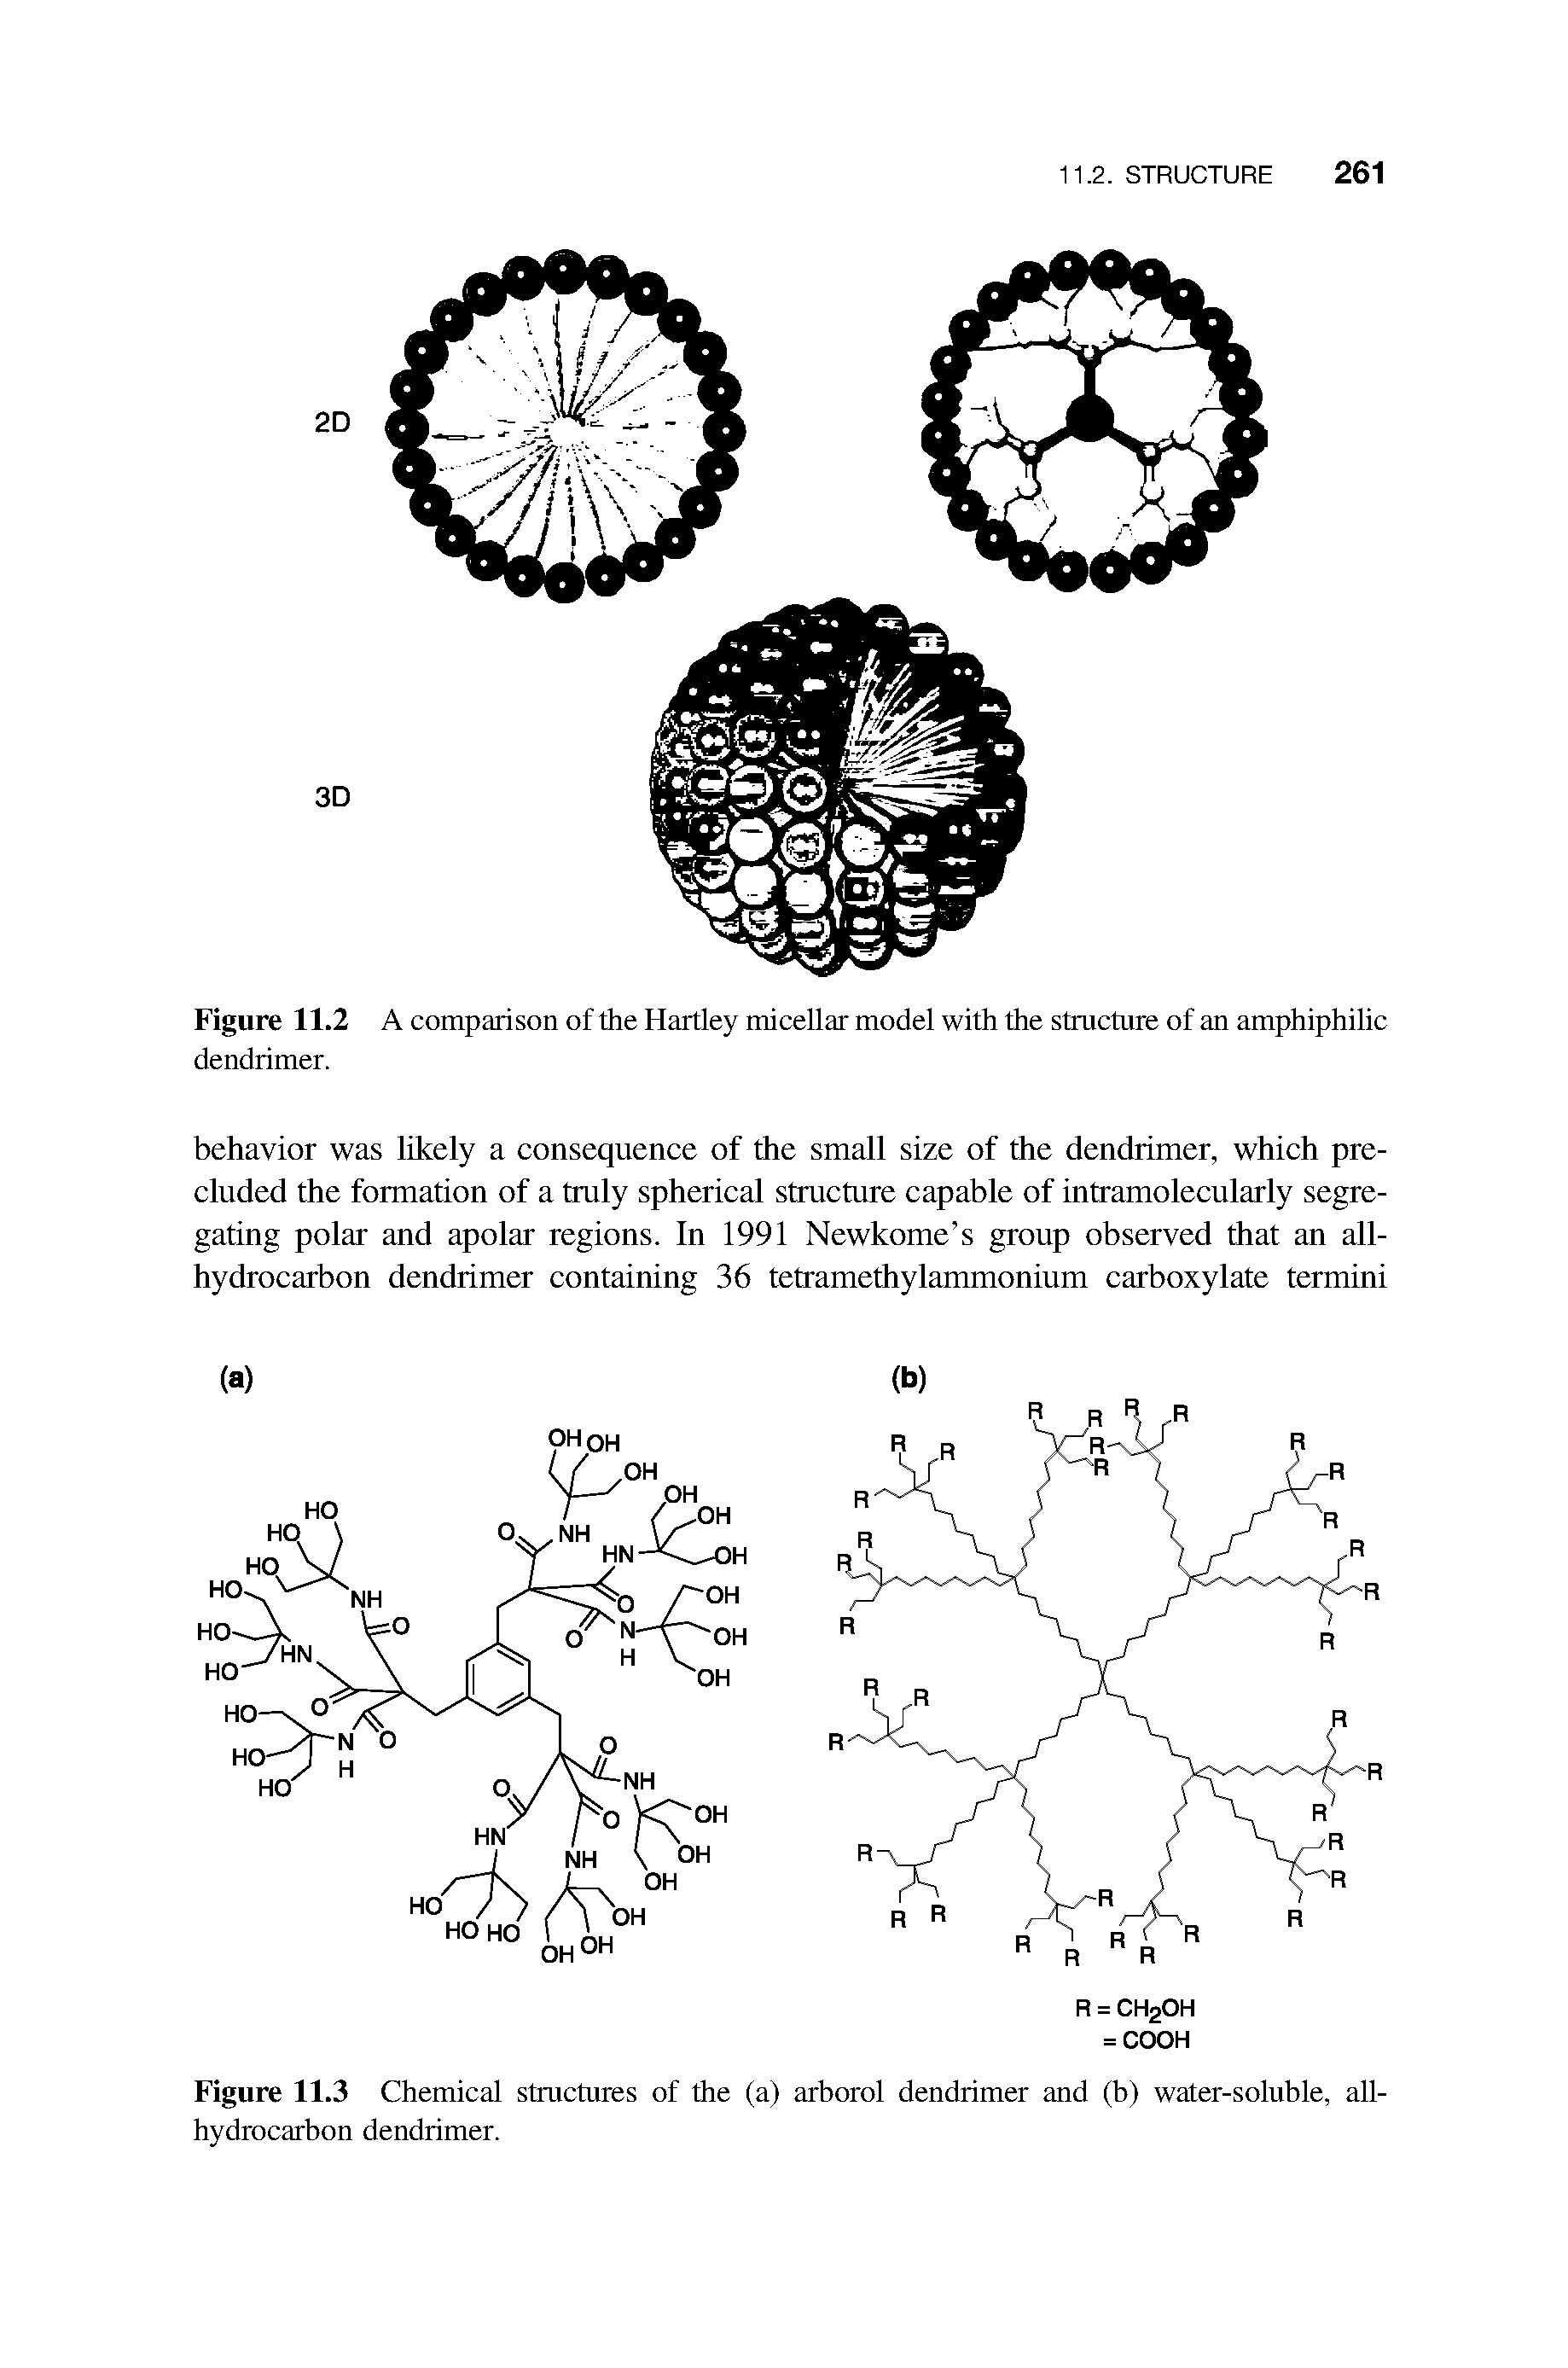 Figure 11.2 A comparison of the Hartley micellar model with the structure of an amphiphilic dendrimer.